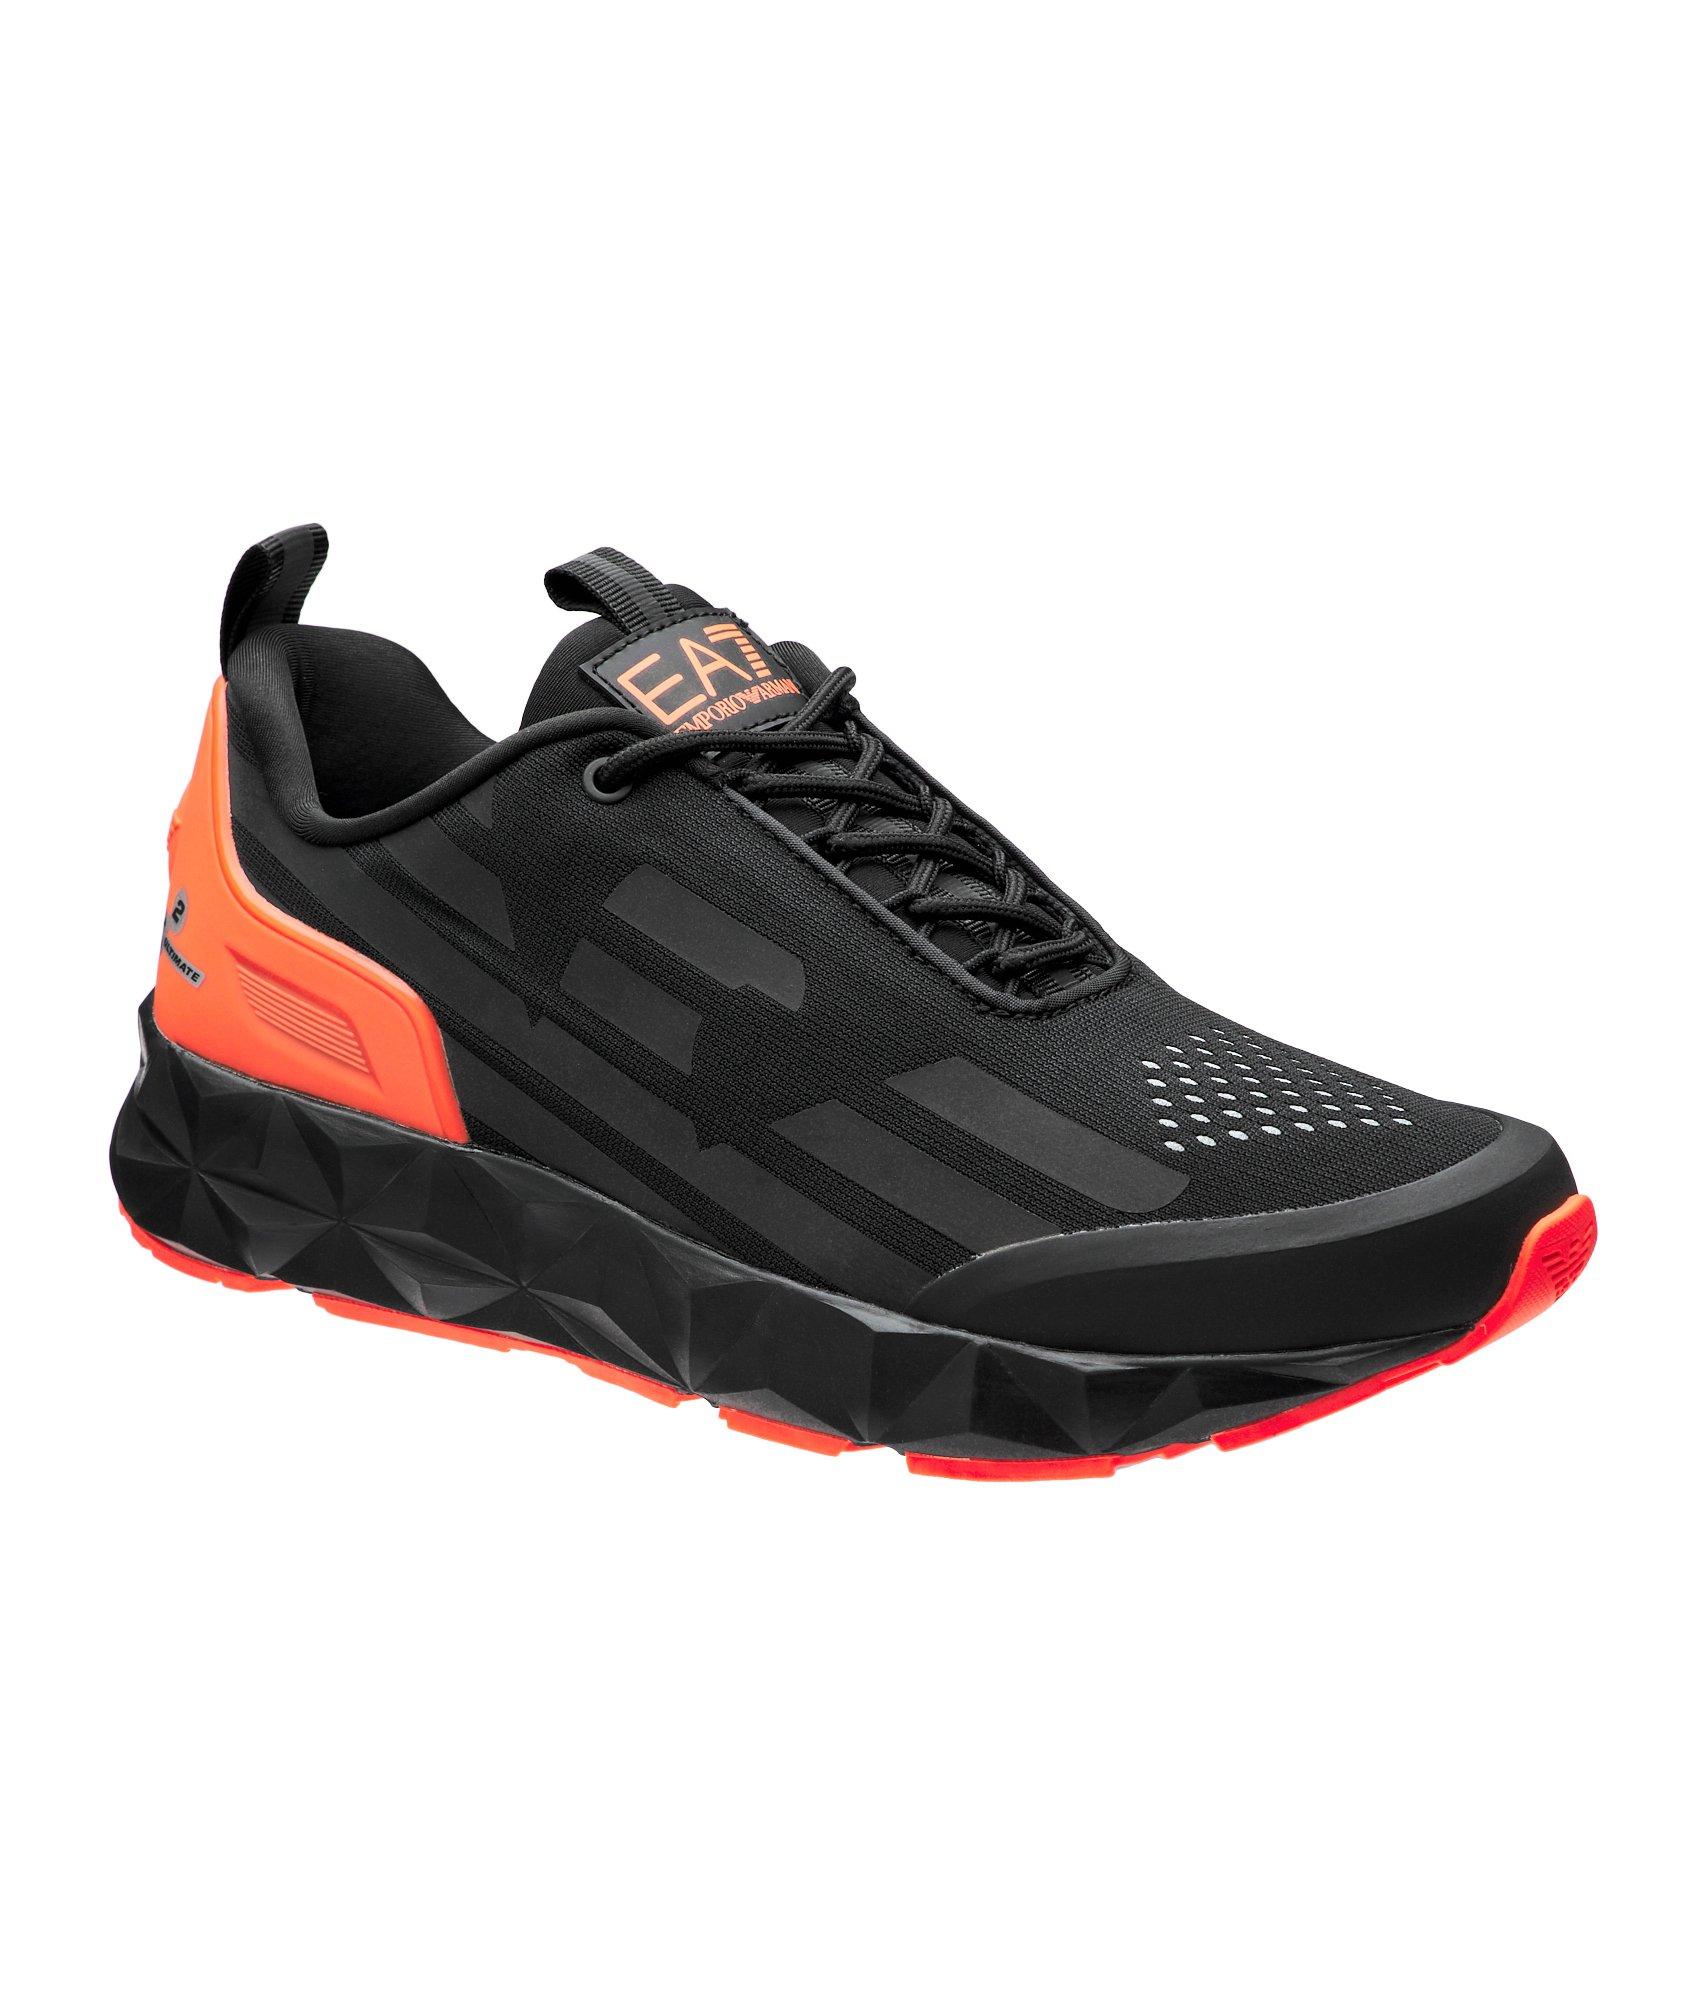 Chaussure sport C2 Ultimate image 0